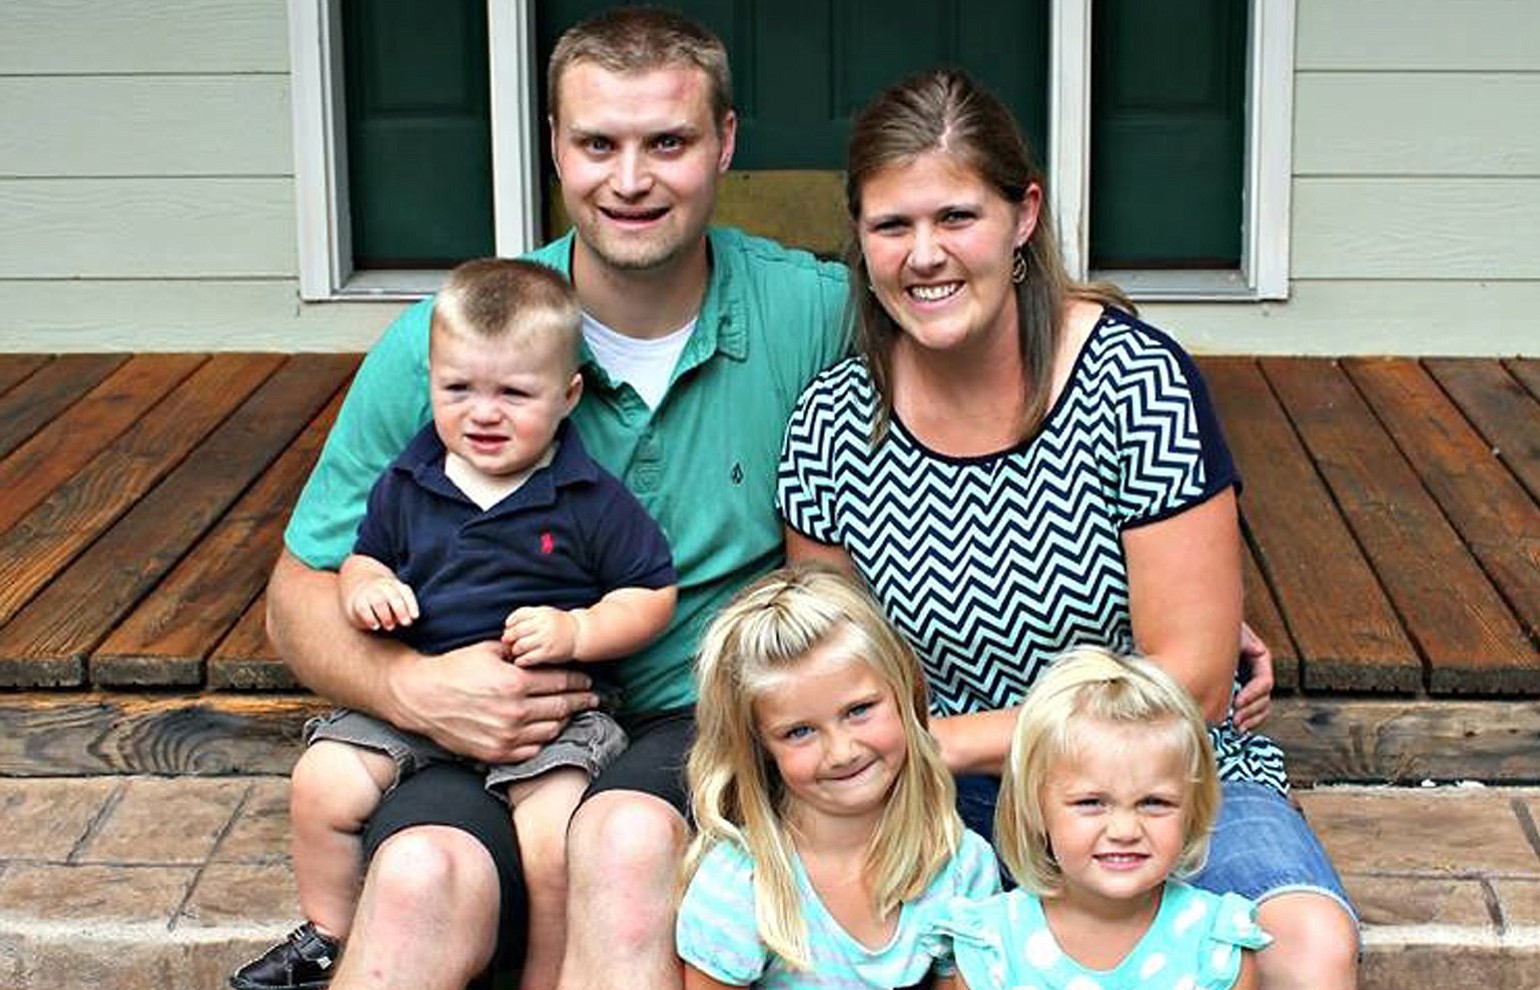 Jake Hanes, with his wife, Melanie Hanes, and their three children, had parts of both of his legs amputated after an accident while chopping down a tree on May 1.